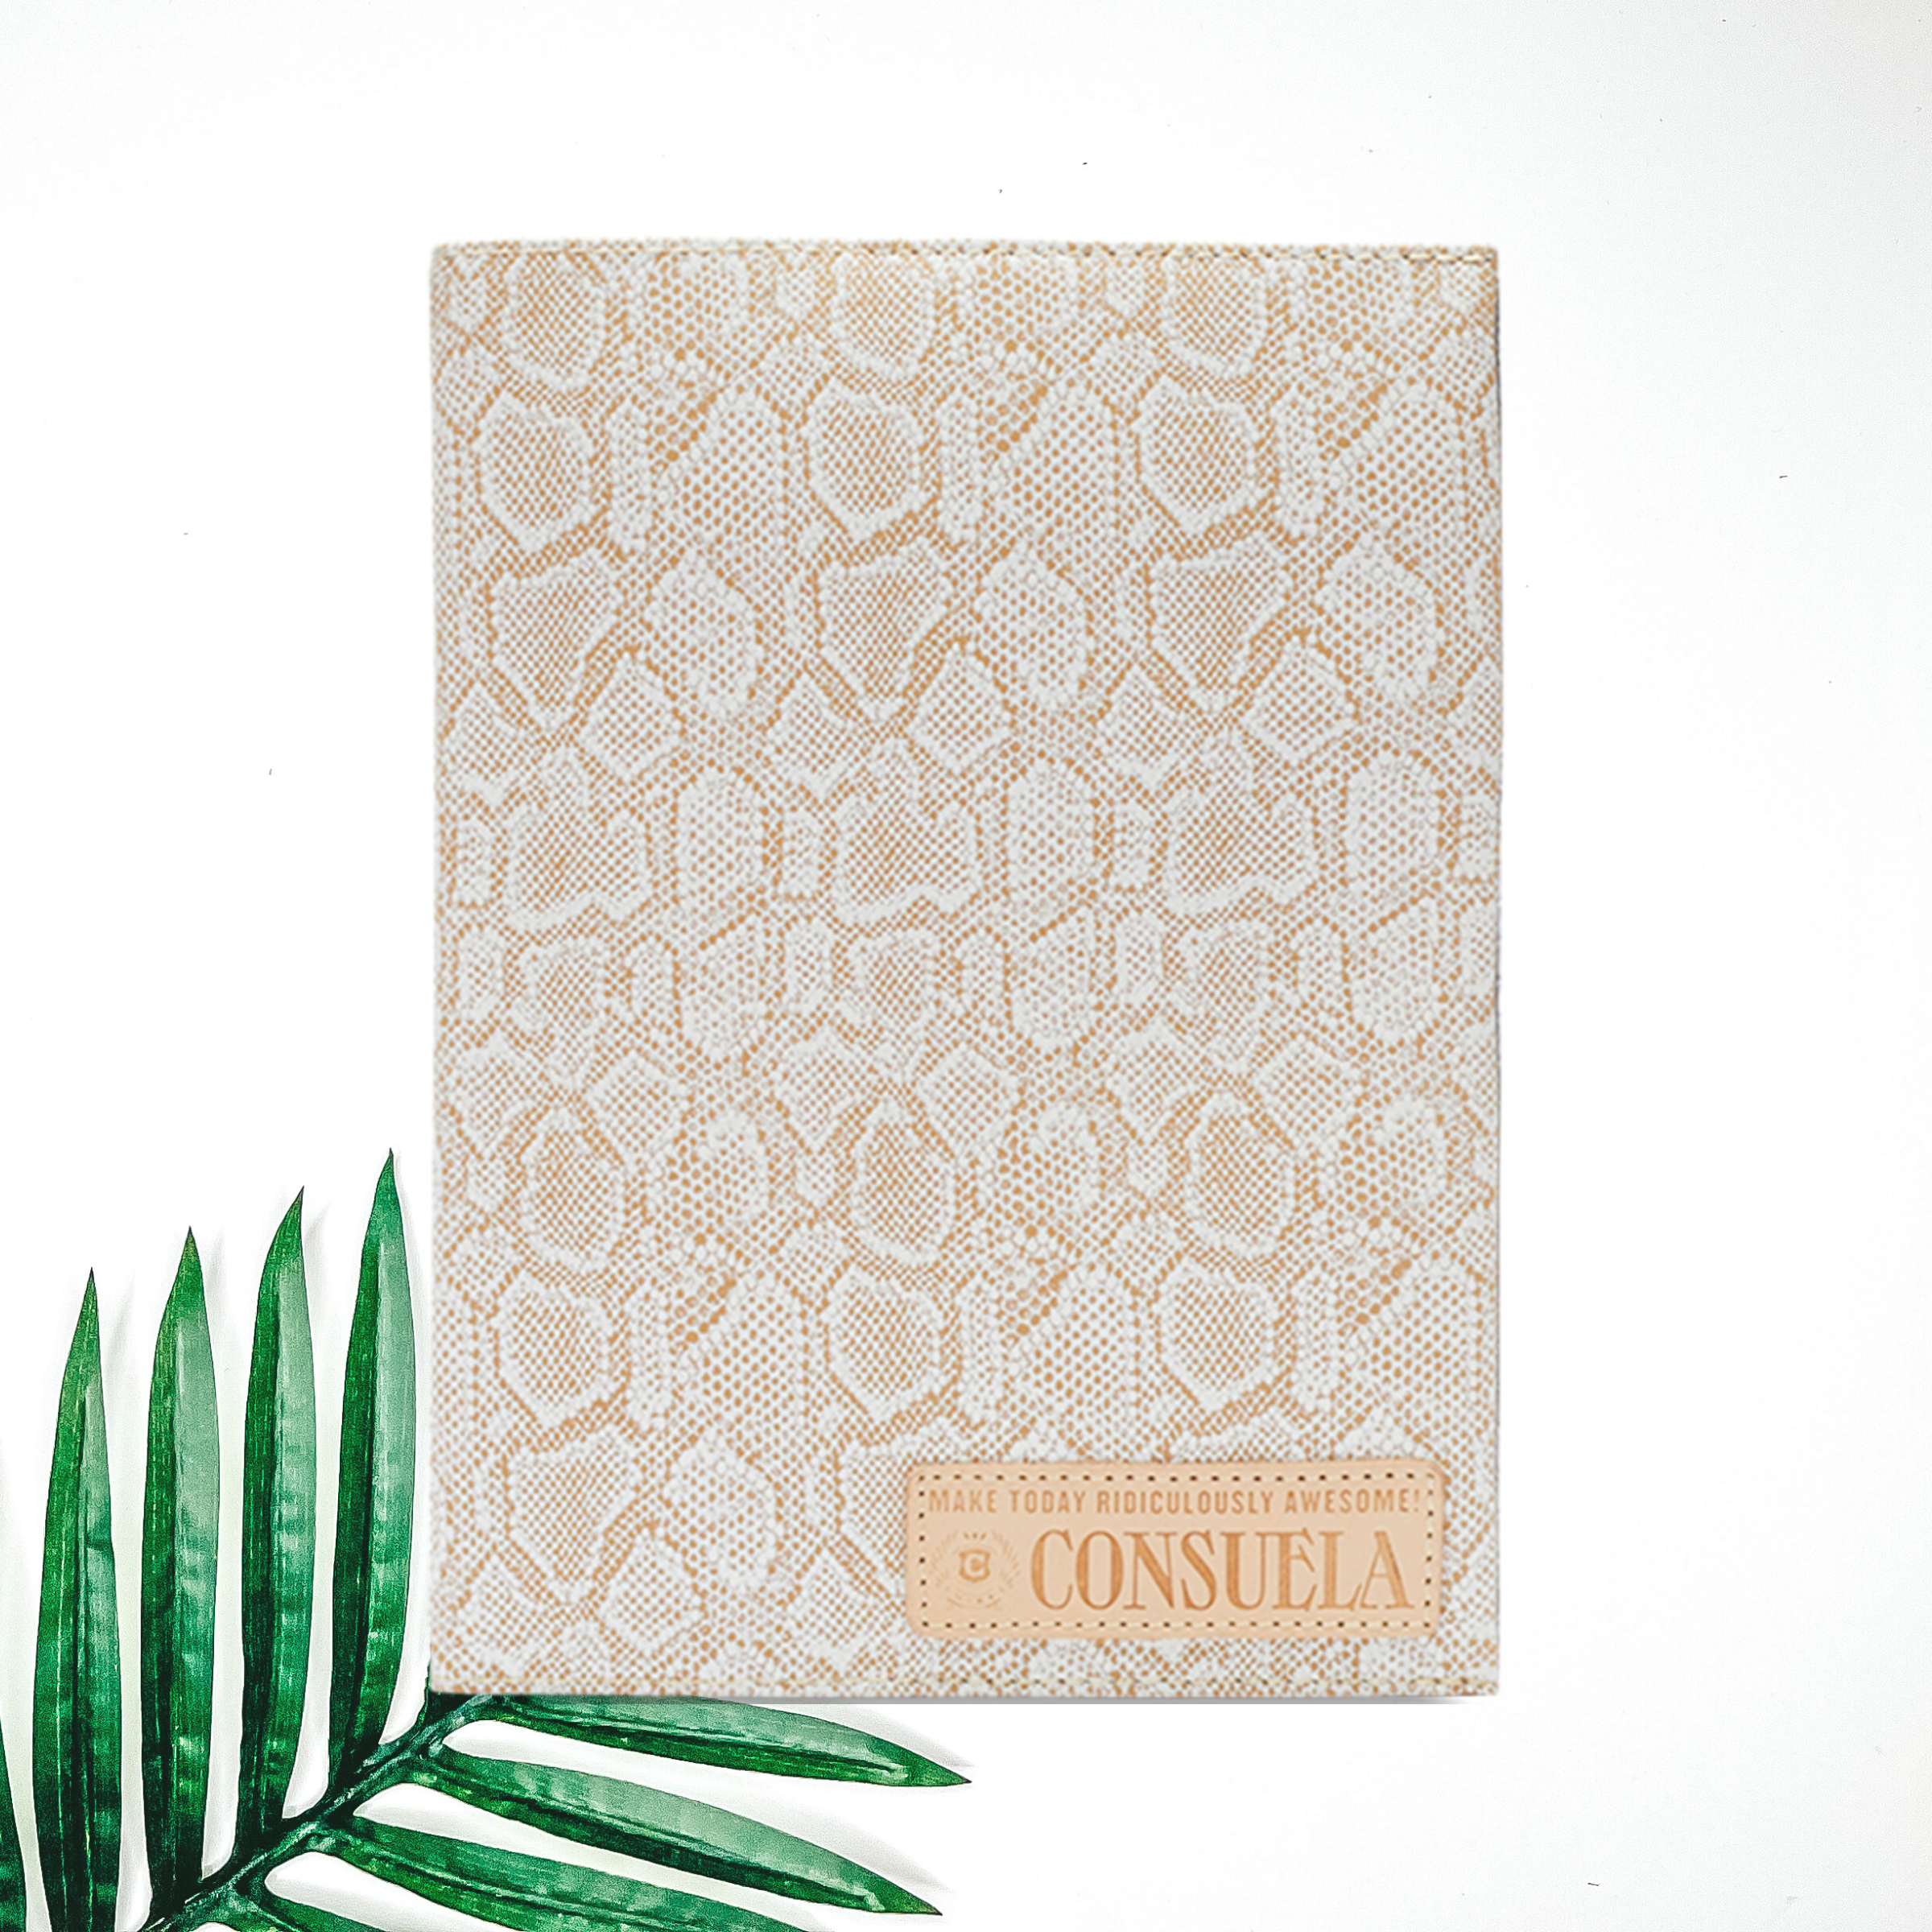 Centered in the picture is a notebook white snakeskin. To the right of the notebook is a palm leaf, all on a white background.